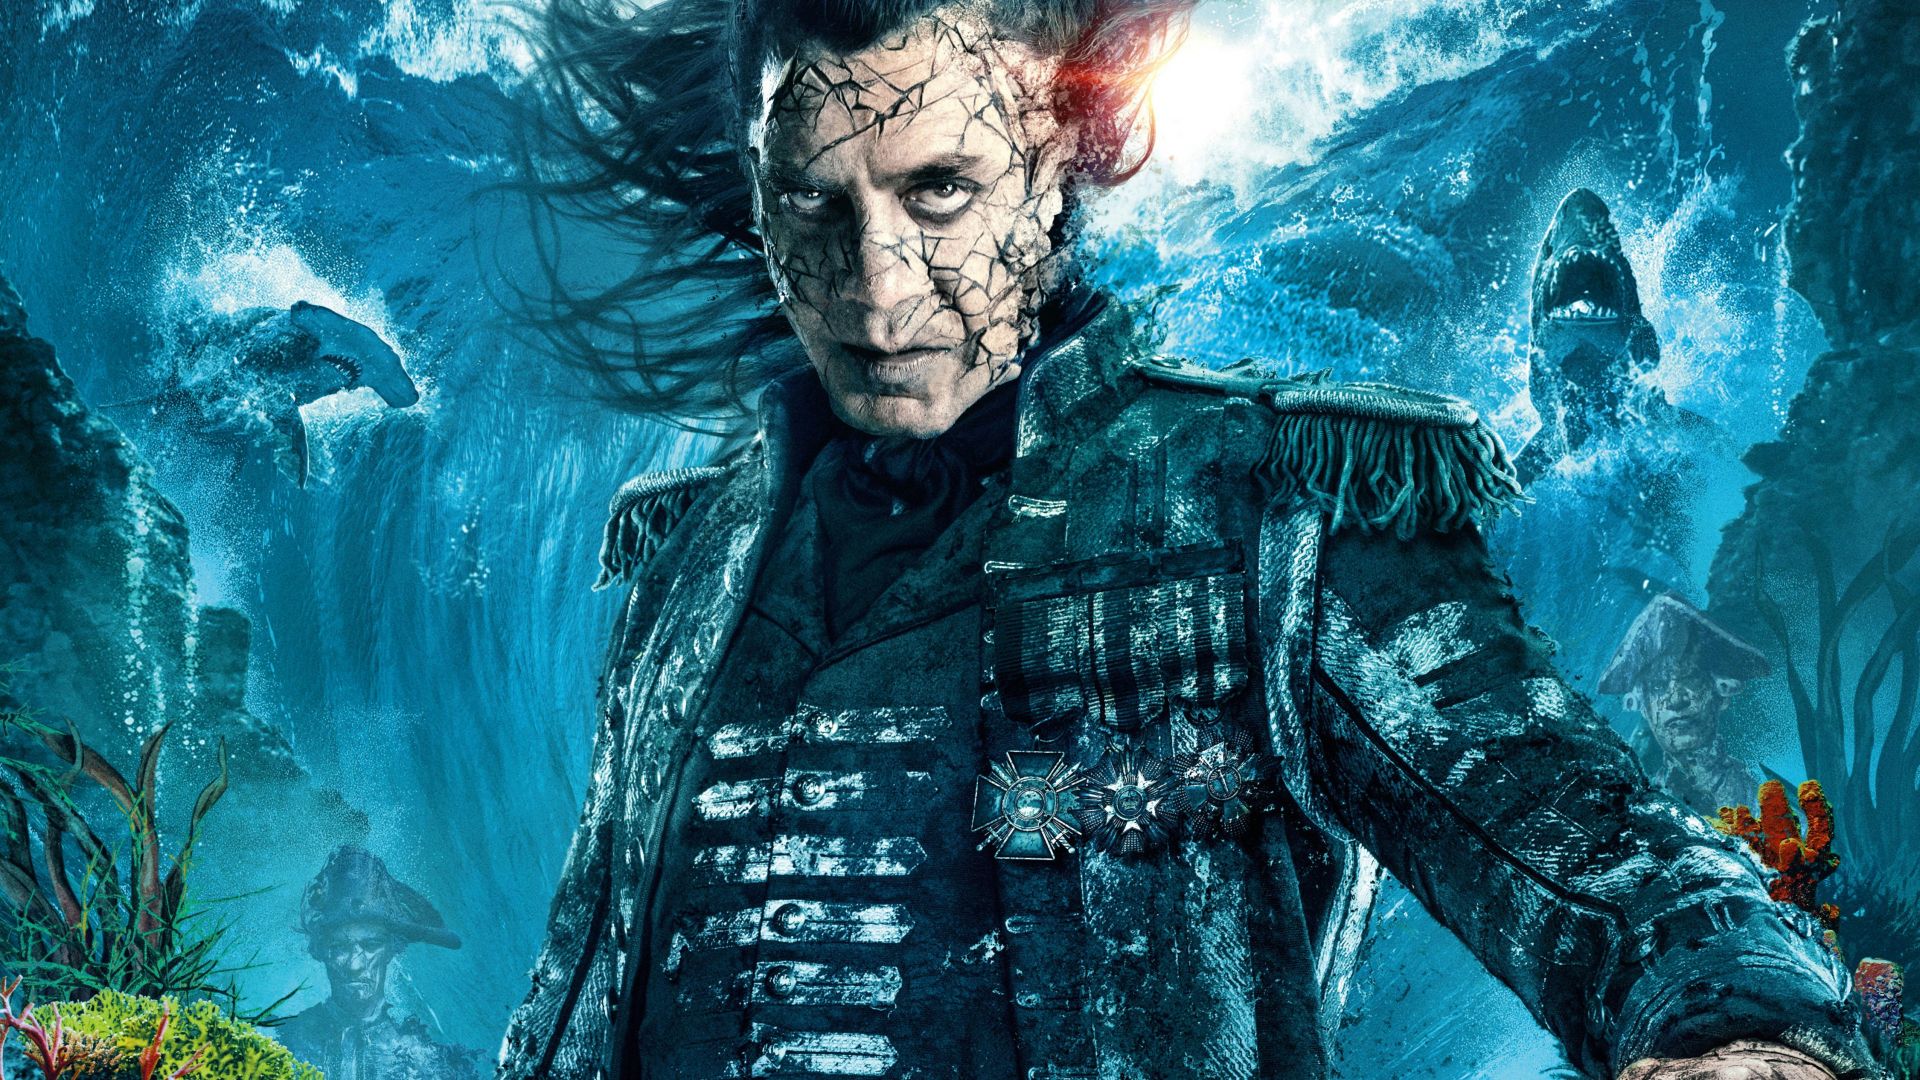 Wallpaper Javier Bardem as Captain Salaza in Pirates of the Caribbean: Dead Men Tell No Tales, movie, 2017 movie, ghost